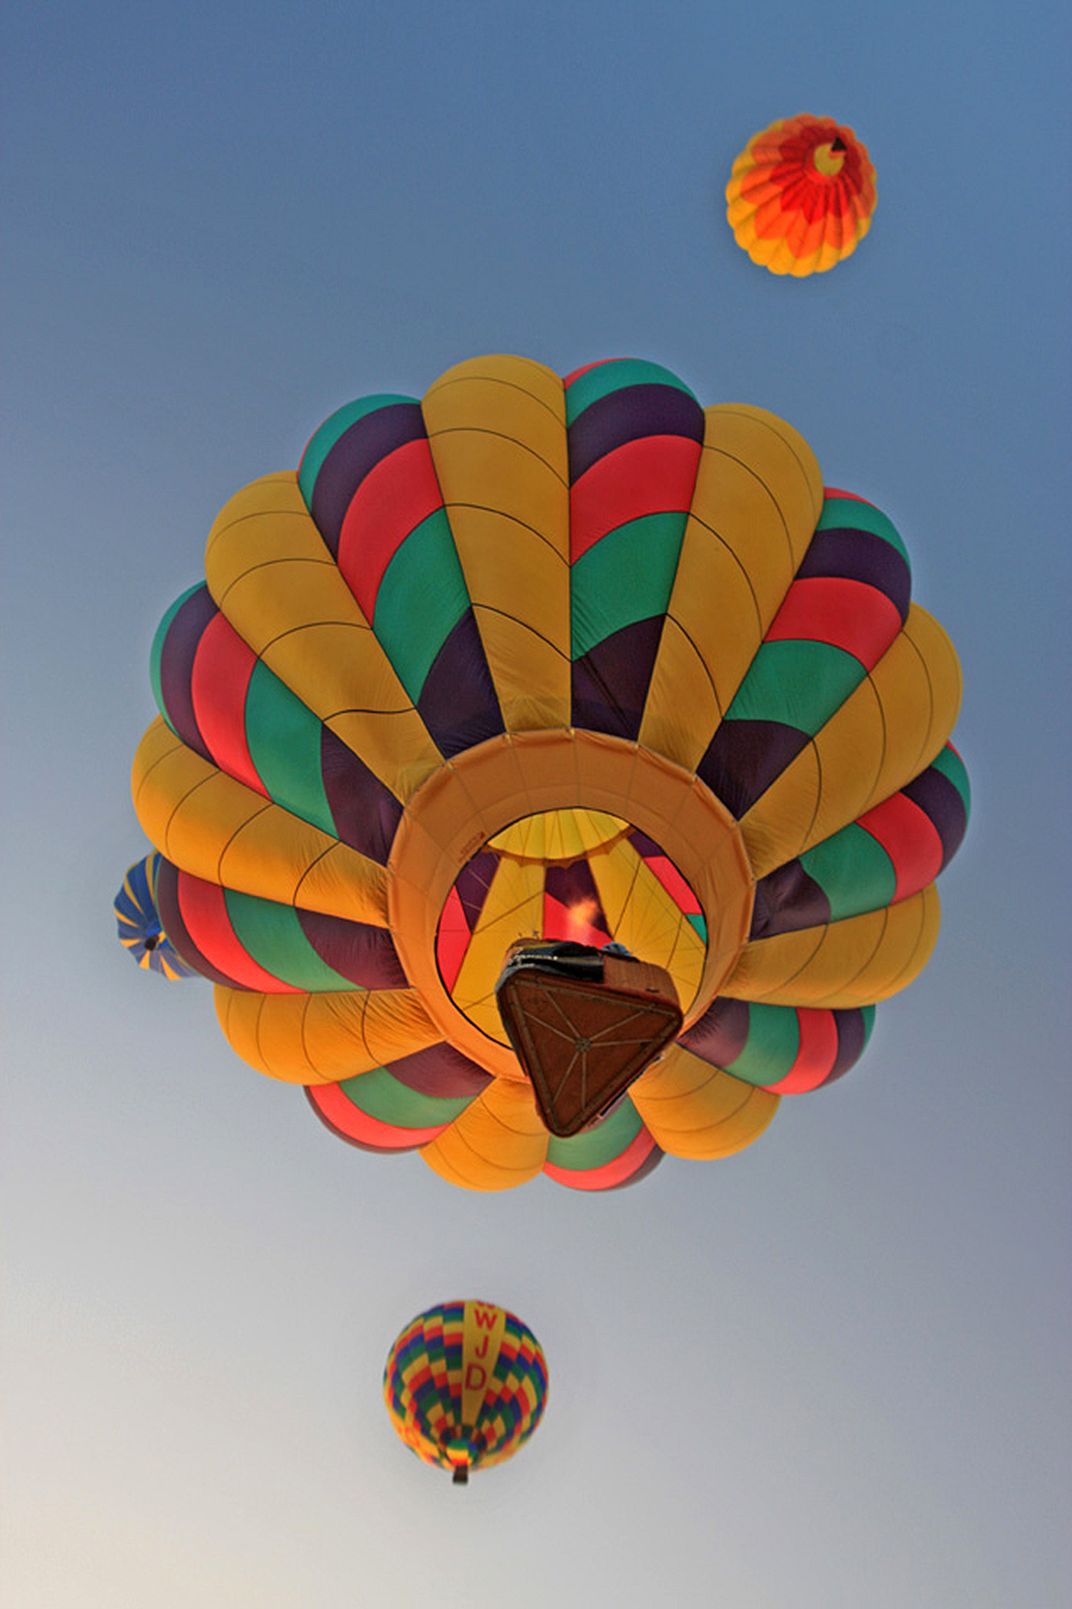 "Up Up And Away" Montague Balloon Festival Smithsonian Photo